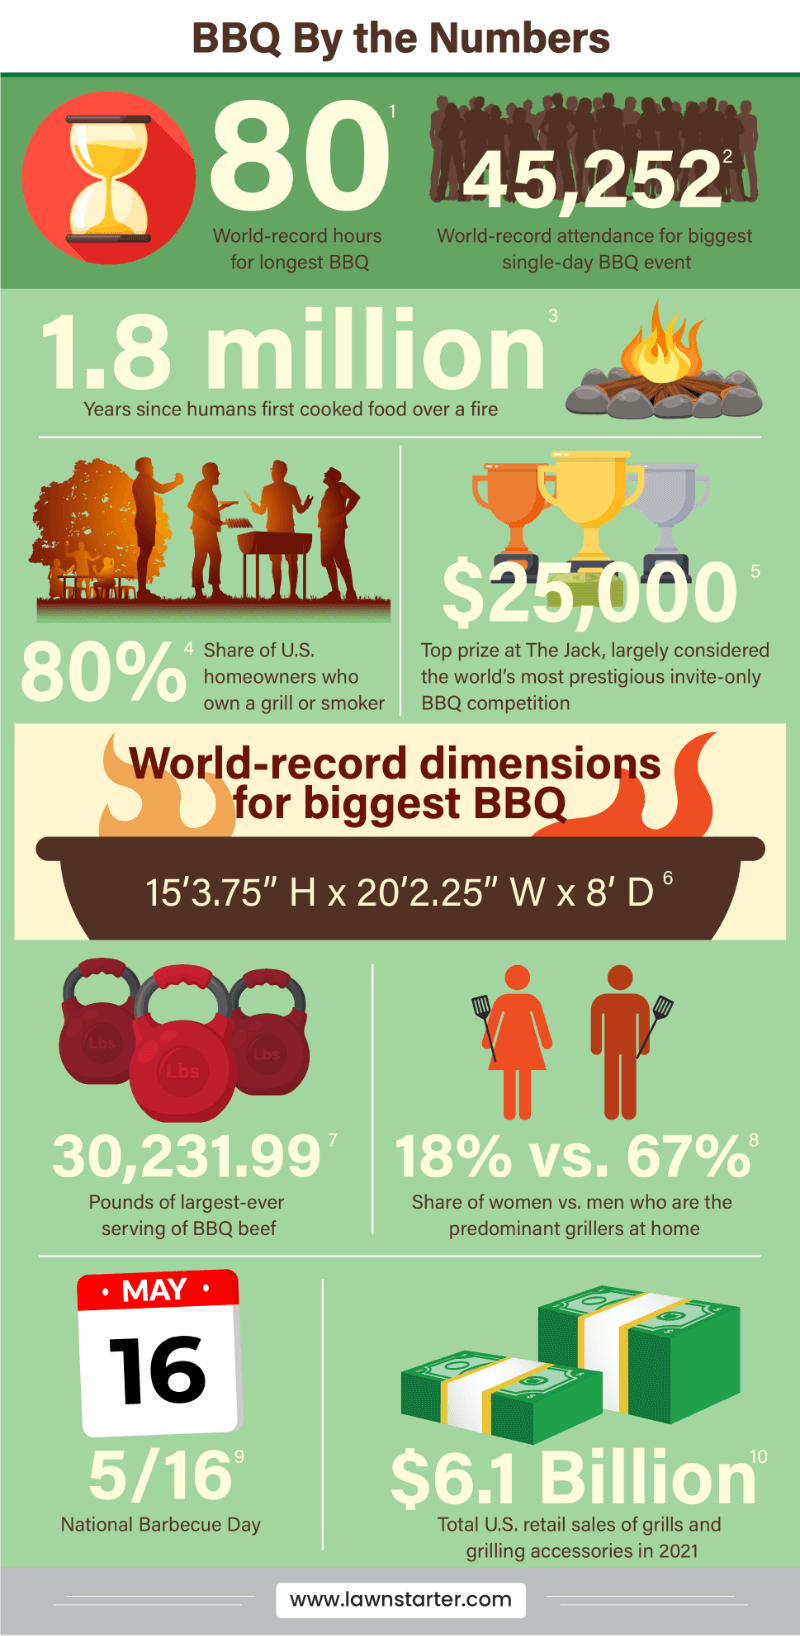 BBQ By the Numbers Infographic is based on world record hours, homeowners who own grills, top prizes and more!